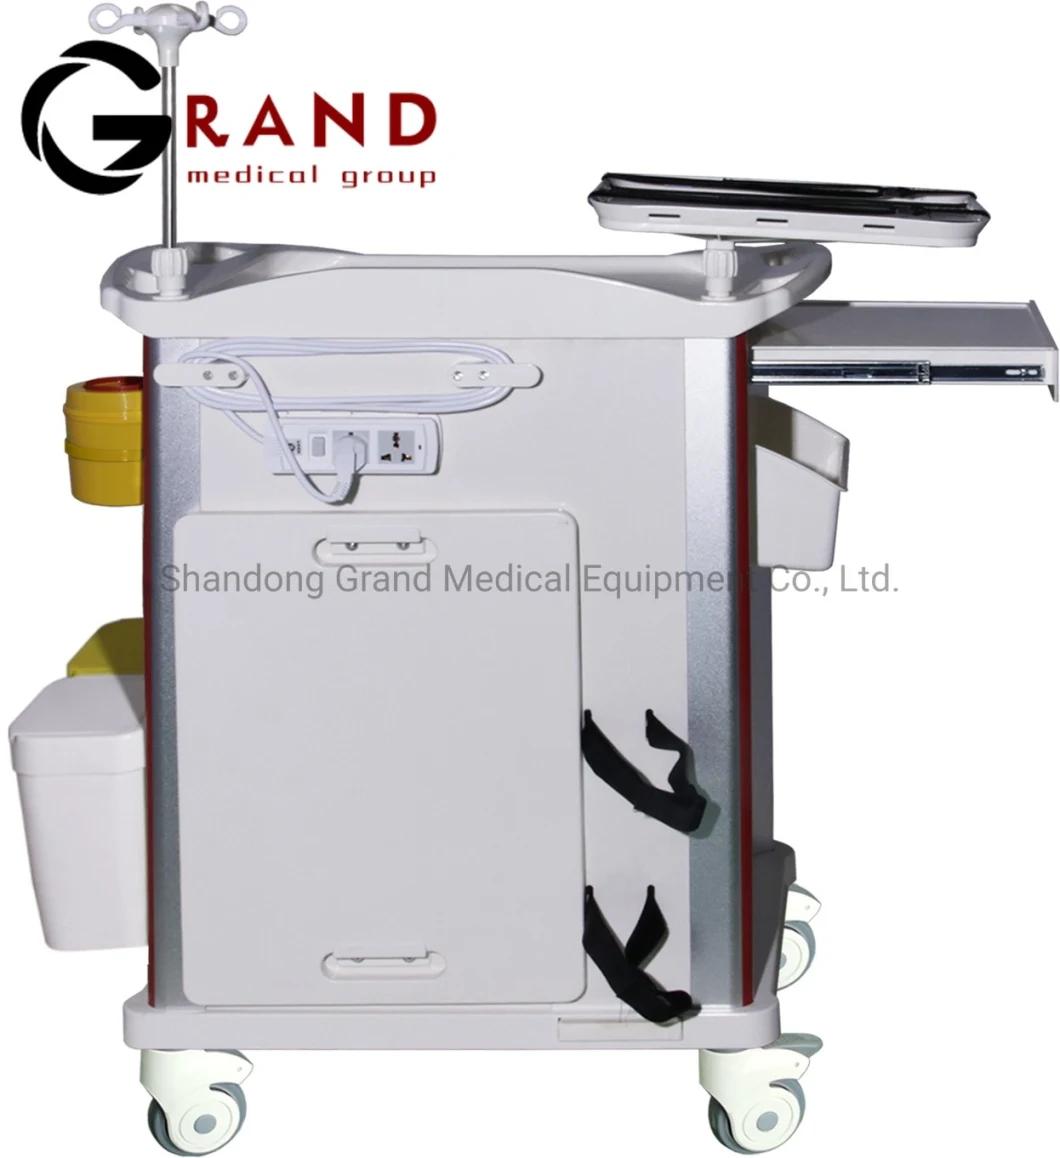 Buy modern Design China Factory in Stock Price Mobile Hospital Trolley Medical Emergency Cart ABS Material with Casters Hospital Furniture